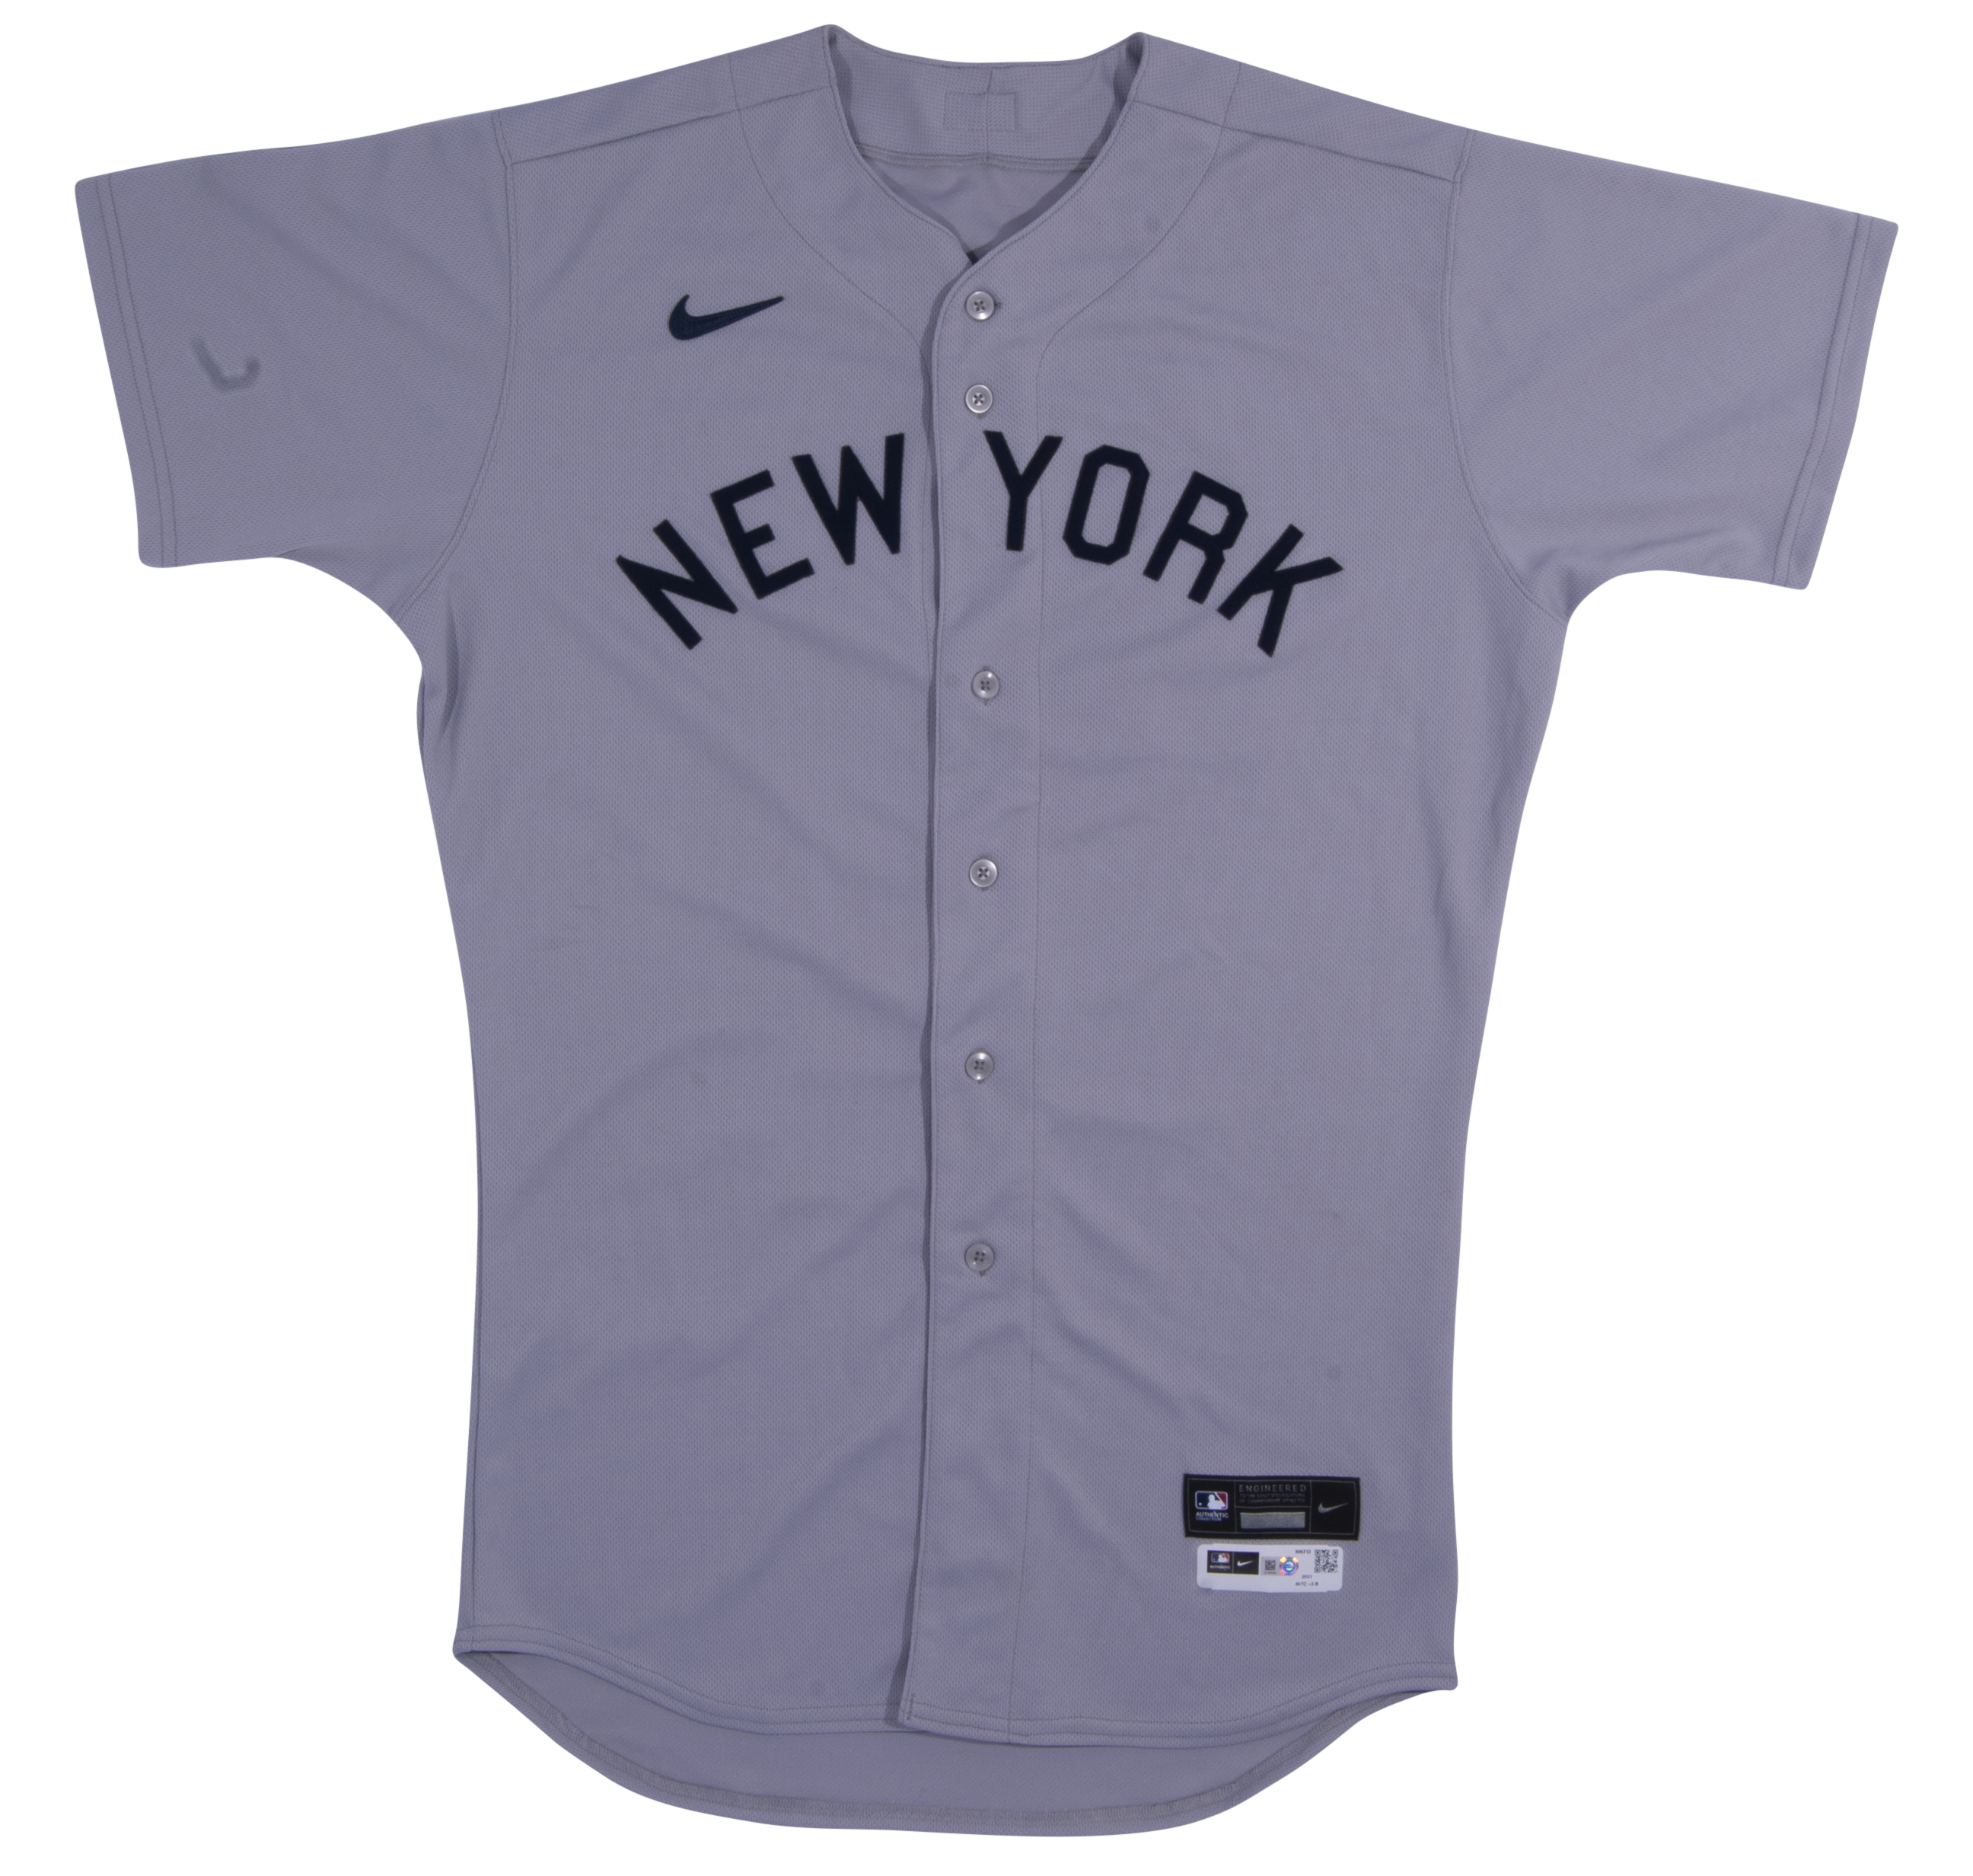 Yankees Official 2021 MLB Jersey in White/Navy Pinstripe